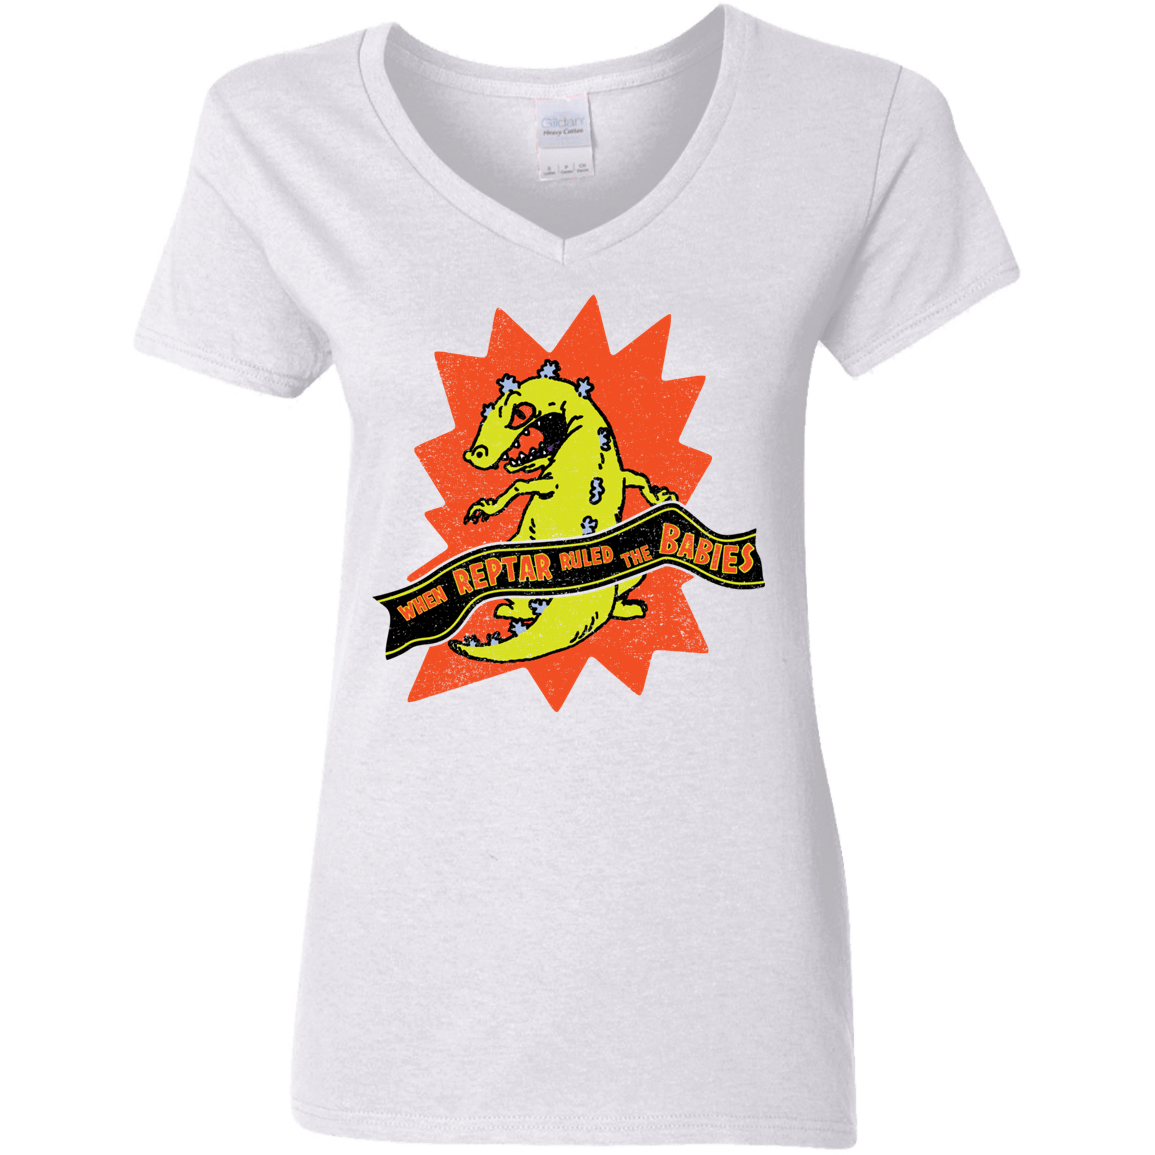 T-Shirts White / S When Reptar Ruled The Babies Women's V-Neck T-Shirt